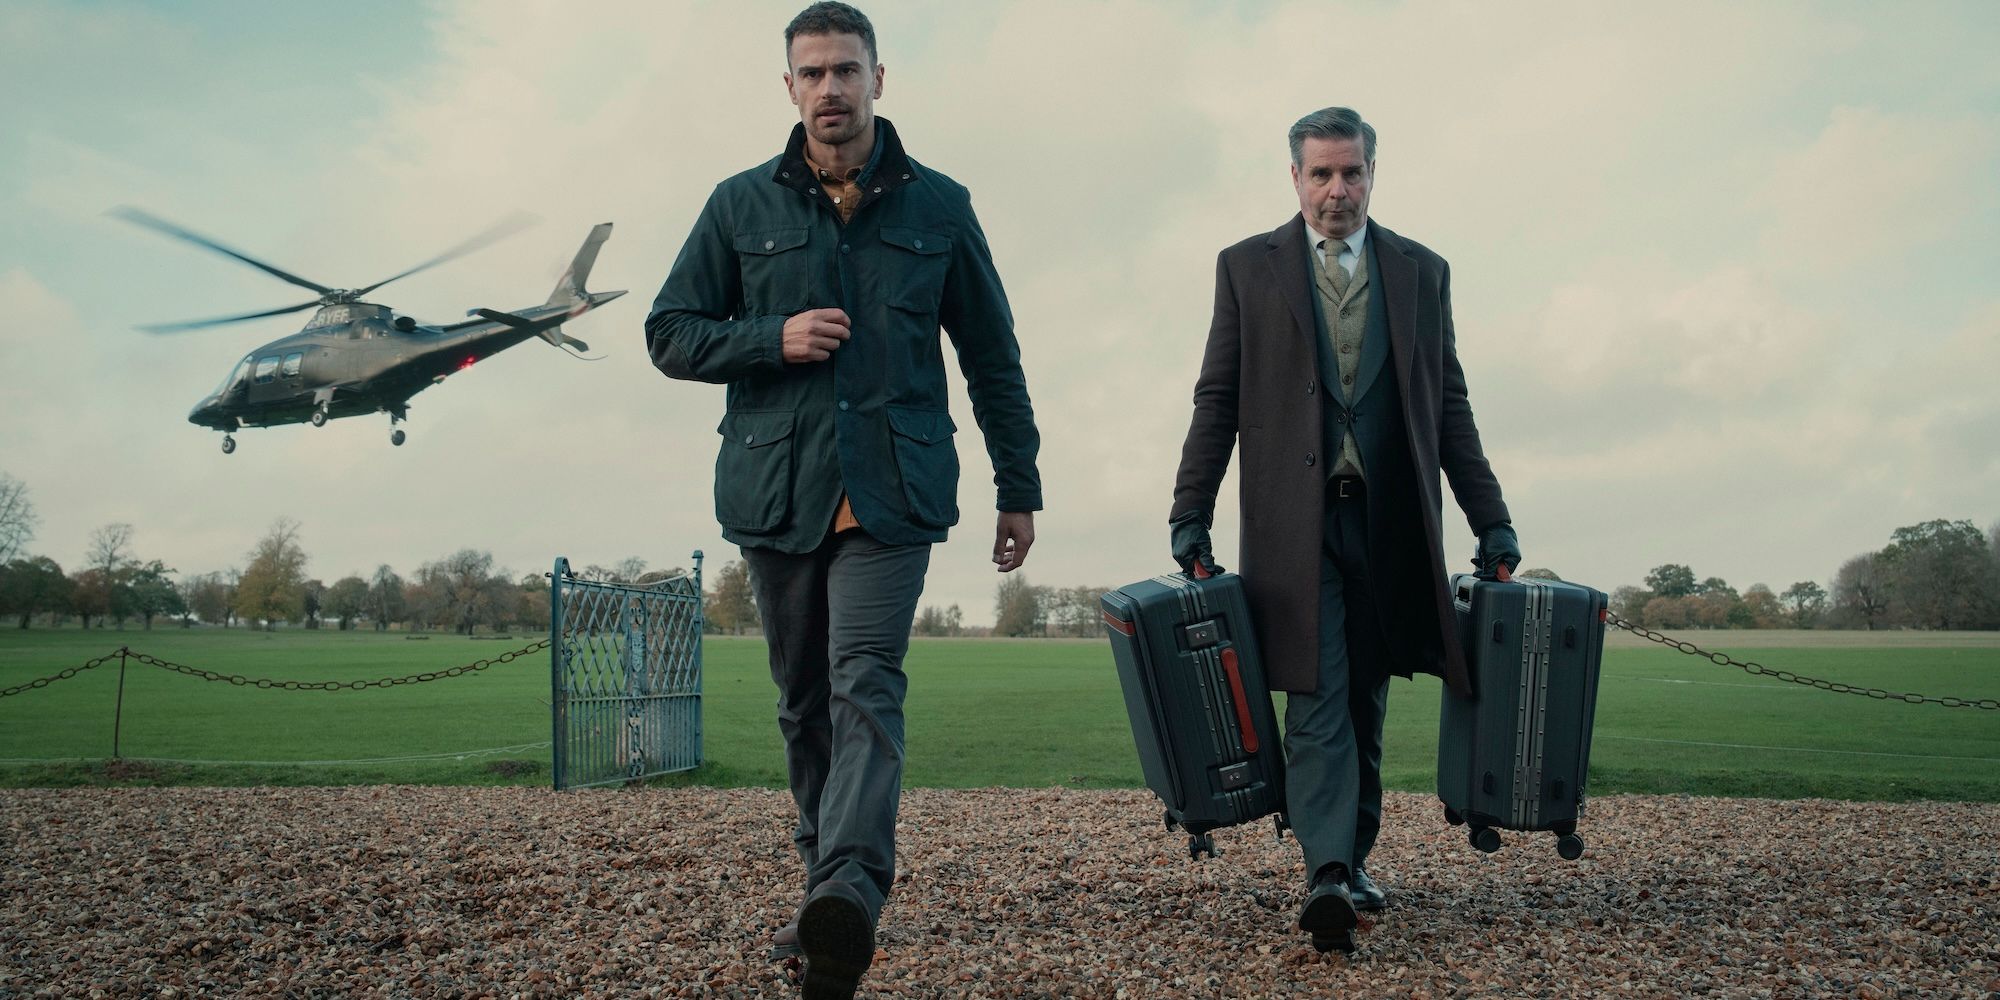 Theo James walks away from a helicopter with a man holding his suitcases in The Gentlemen series